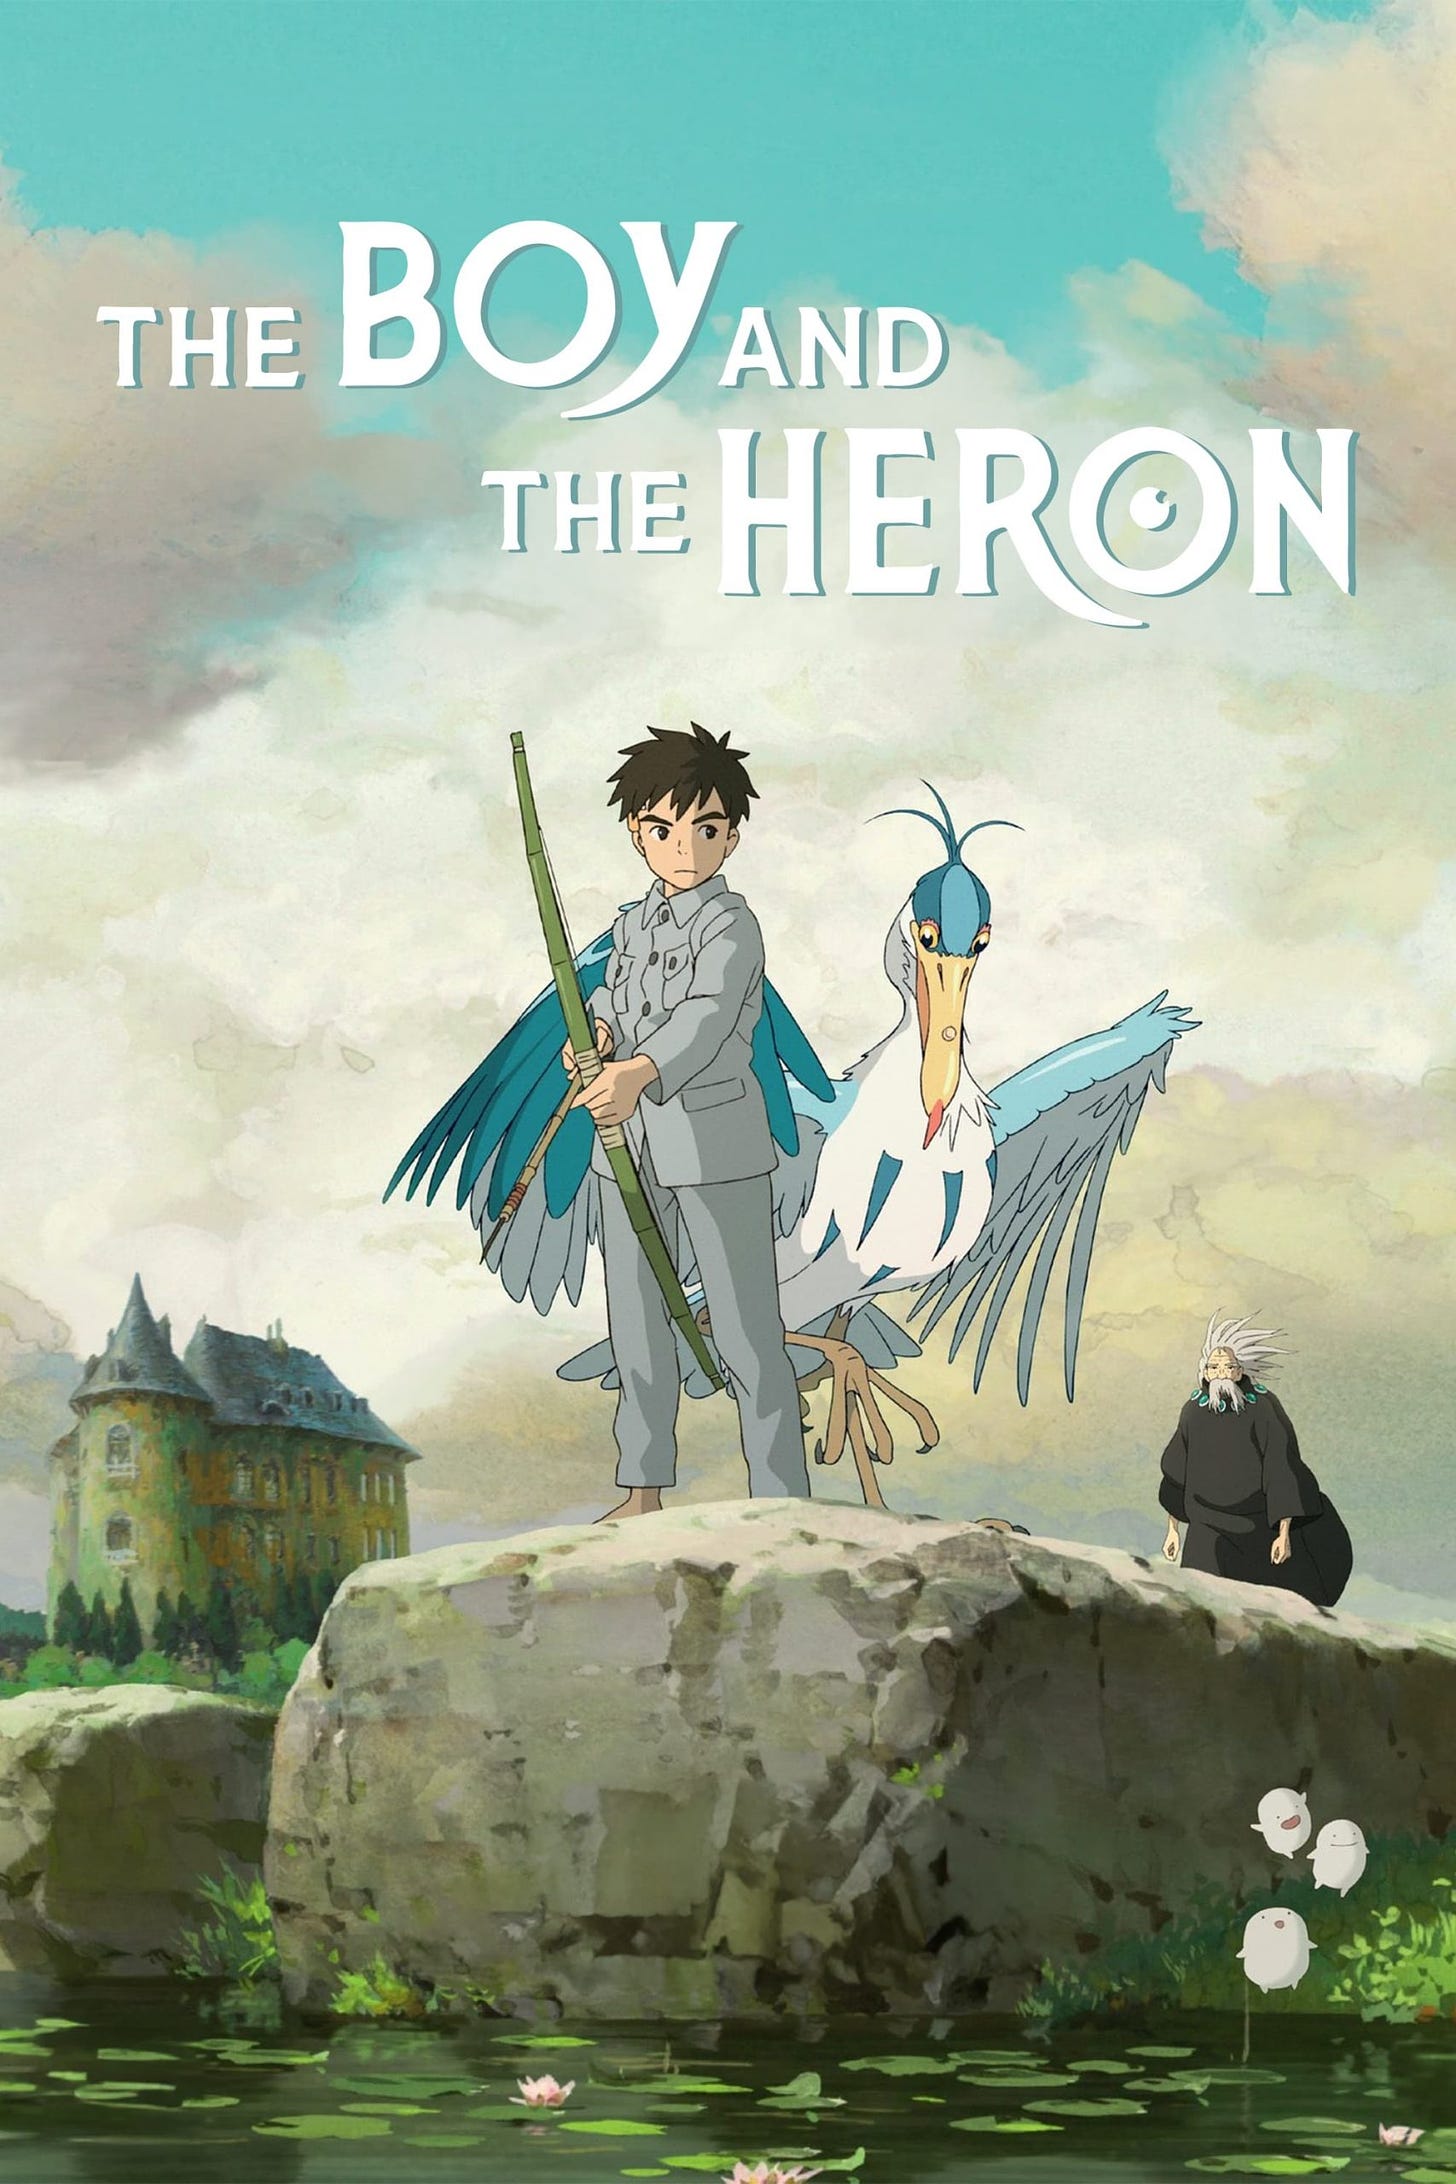 Movie poster for Studio Ghibli's "The Boy and the Heron"